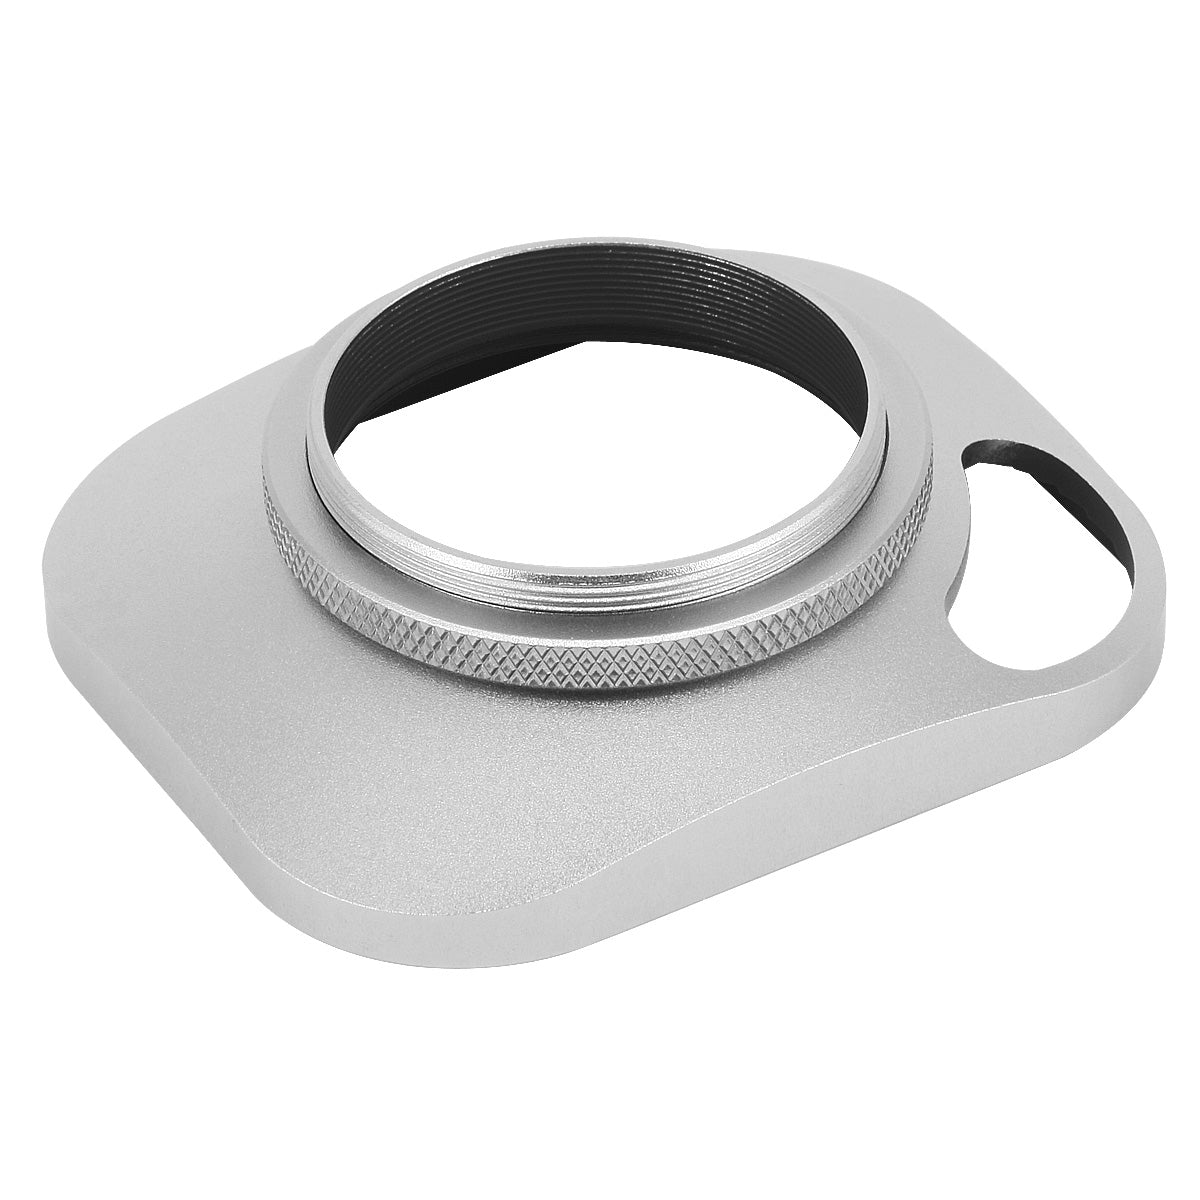 Haoge LH-W39P 39mm Square Metal Screw-in Lens Hood Hollow Out Designed with Cap for Leica Rangefinder Camera with 39mm E39 Filter Thread Lens Silver